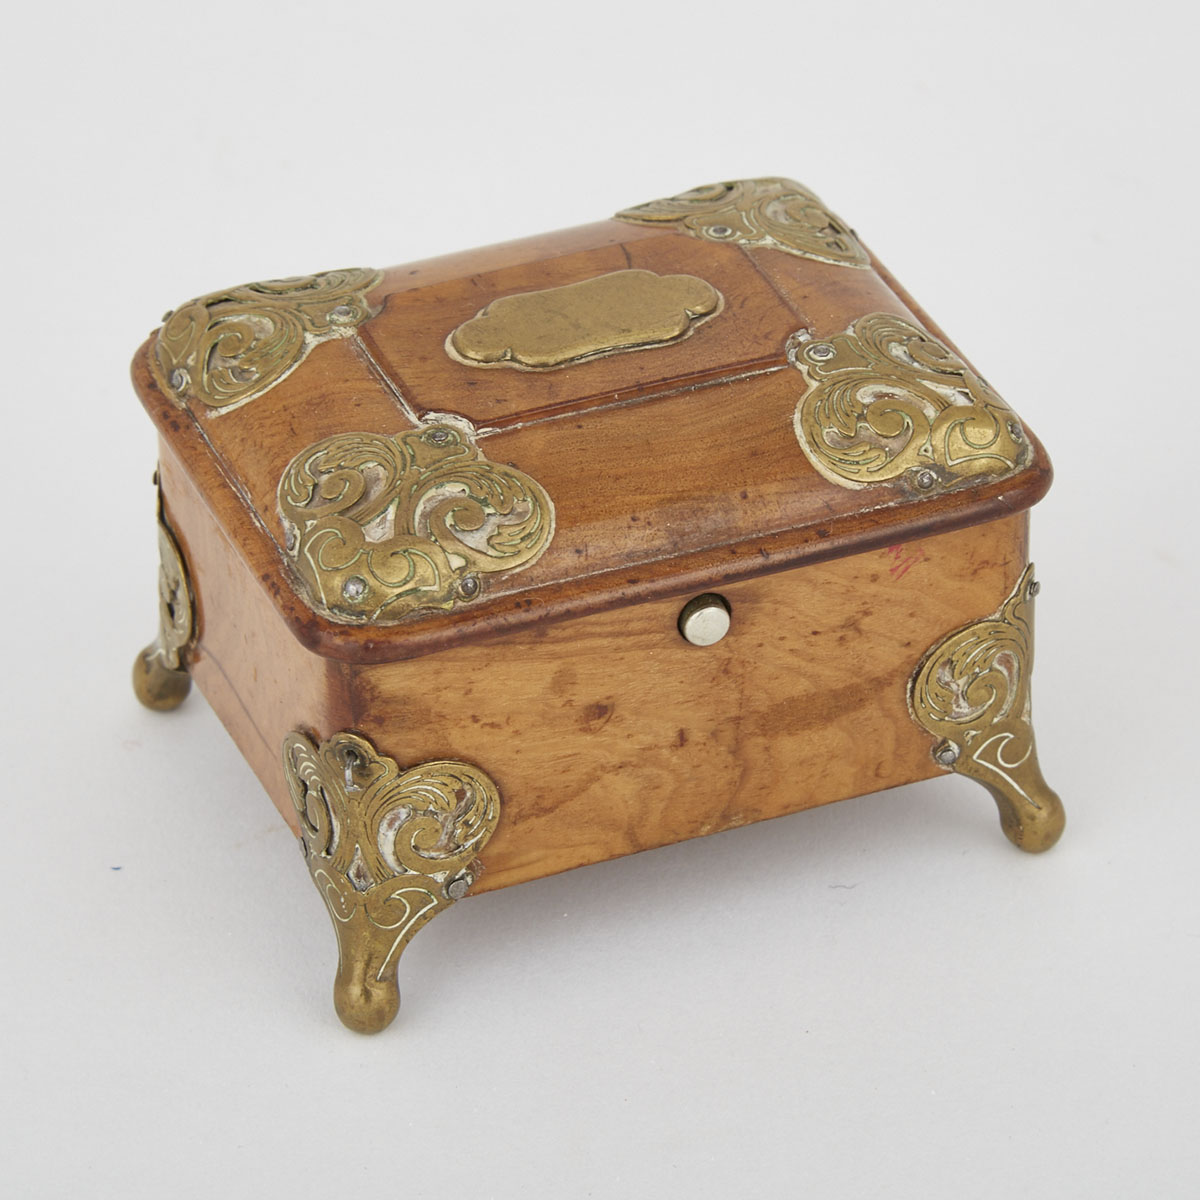 Italian Brass Mounted Olive Wood Trinket Box, 19th/early 20th century